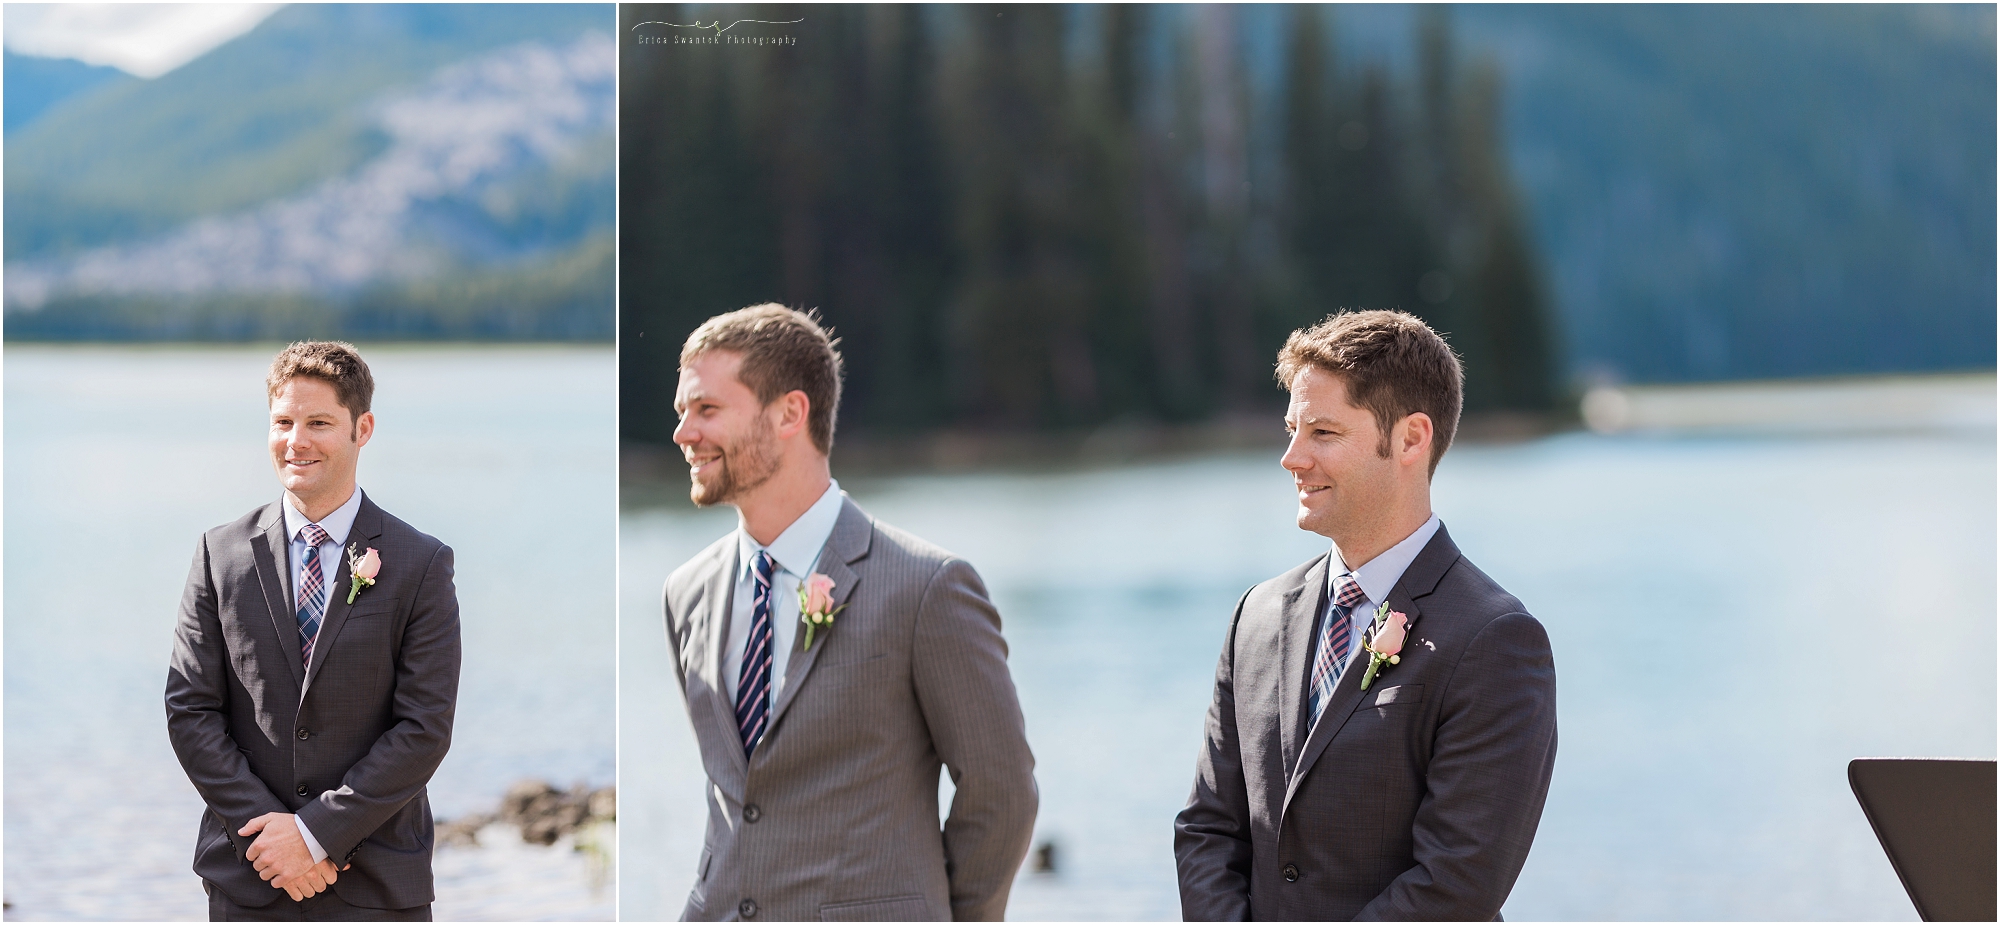 A groom waits with a big smile to see his bride for the first time at his intimate outdoor Oregon wedding. 